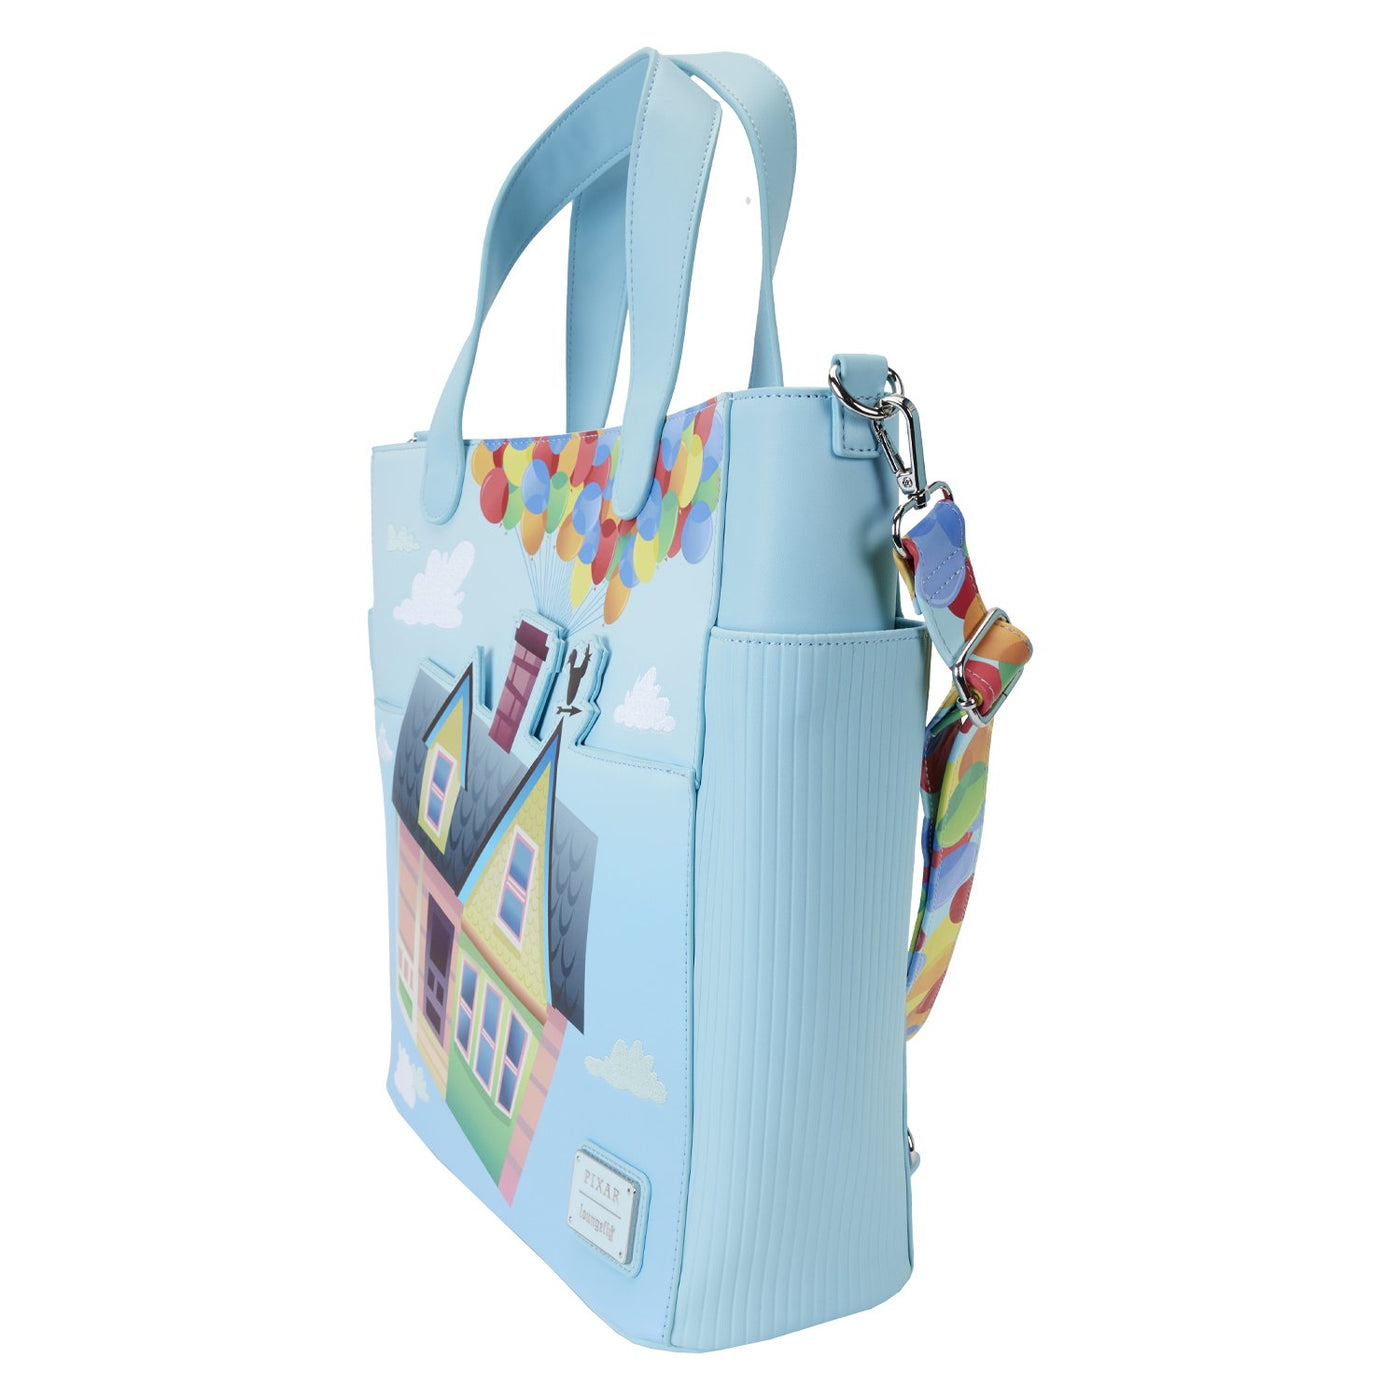 Loungefly Pixar Up 15th Anniversary Convertible Tote Bag - Side View